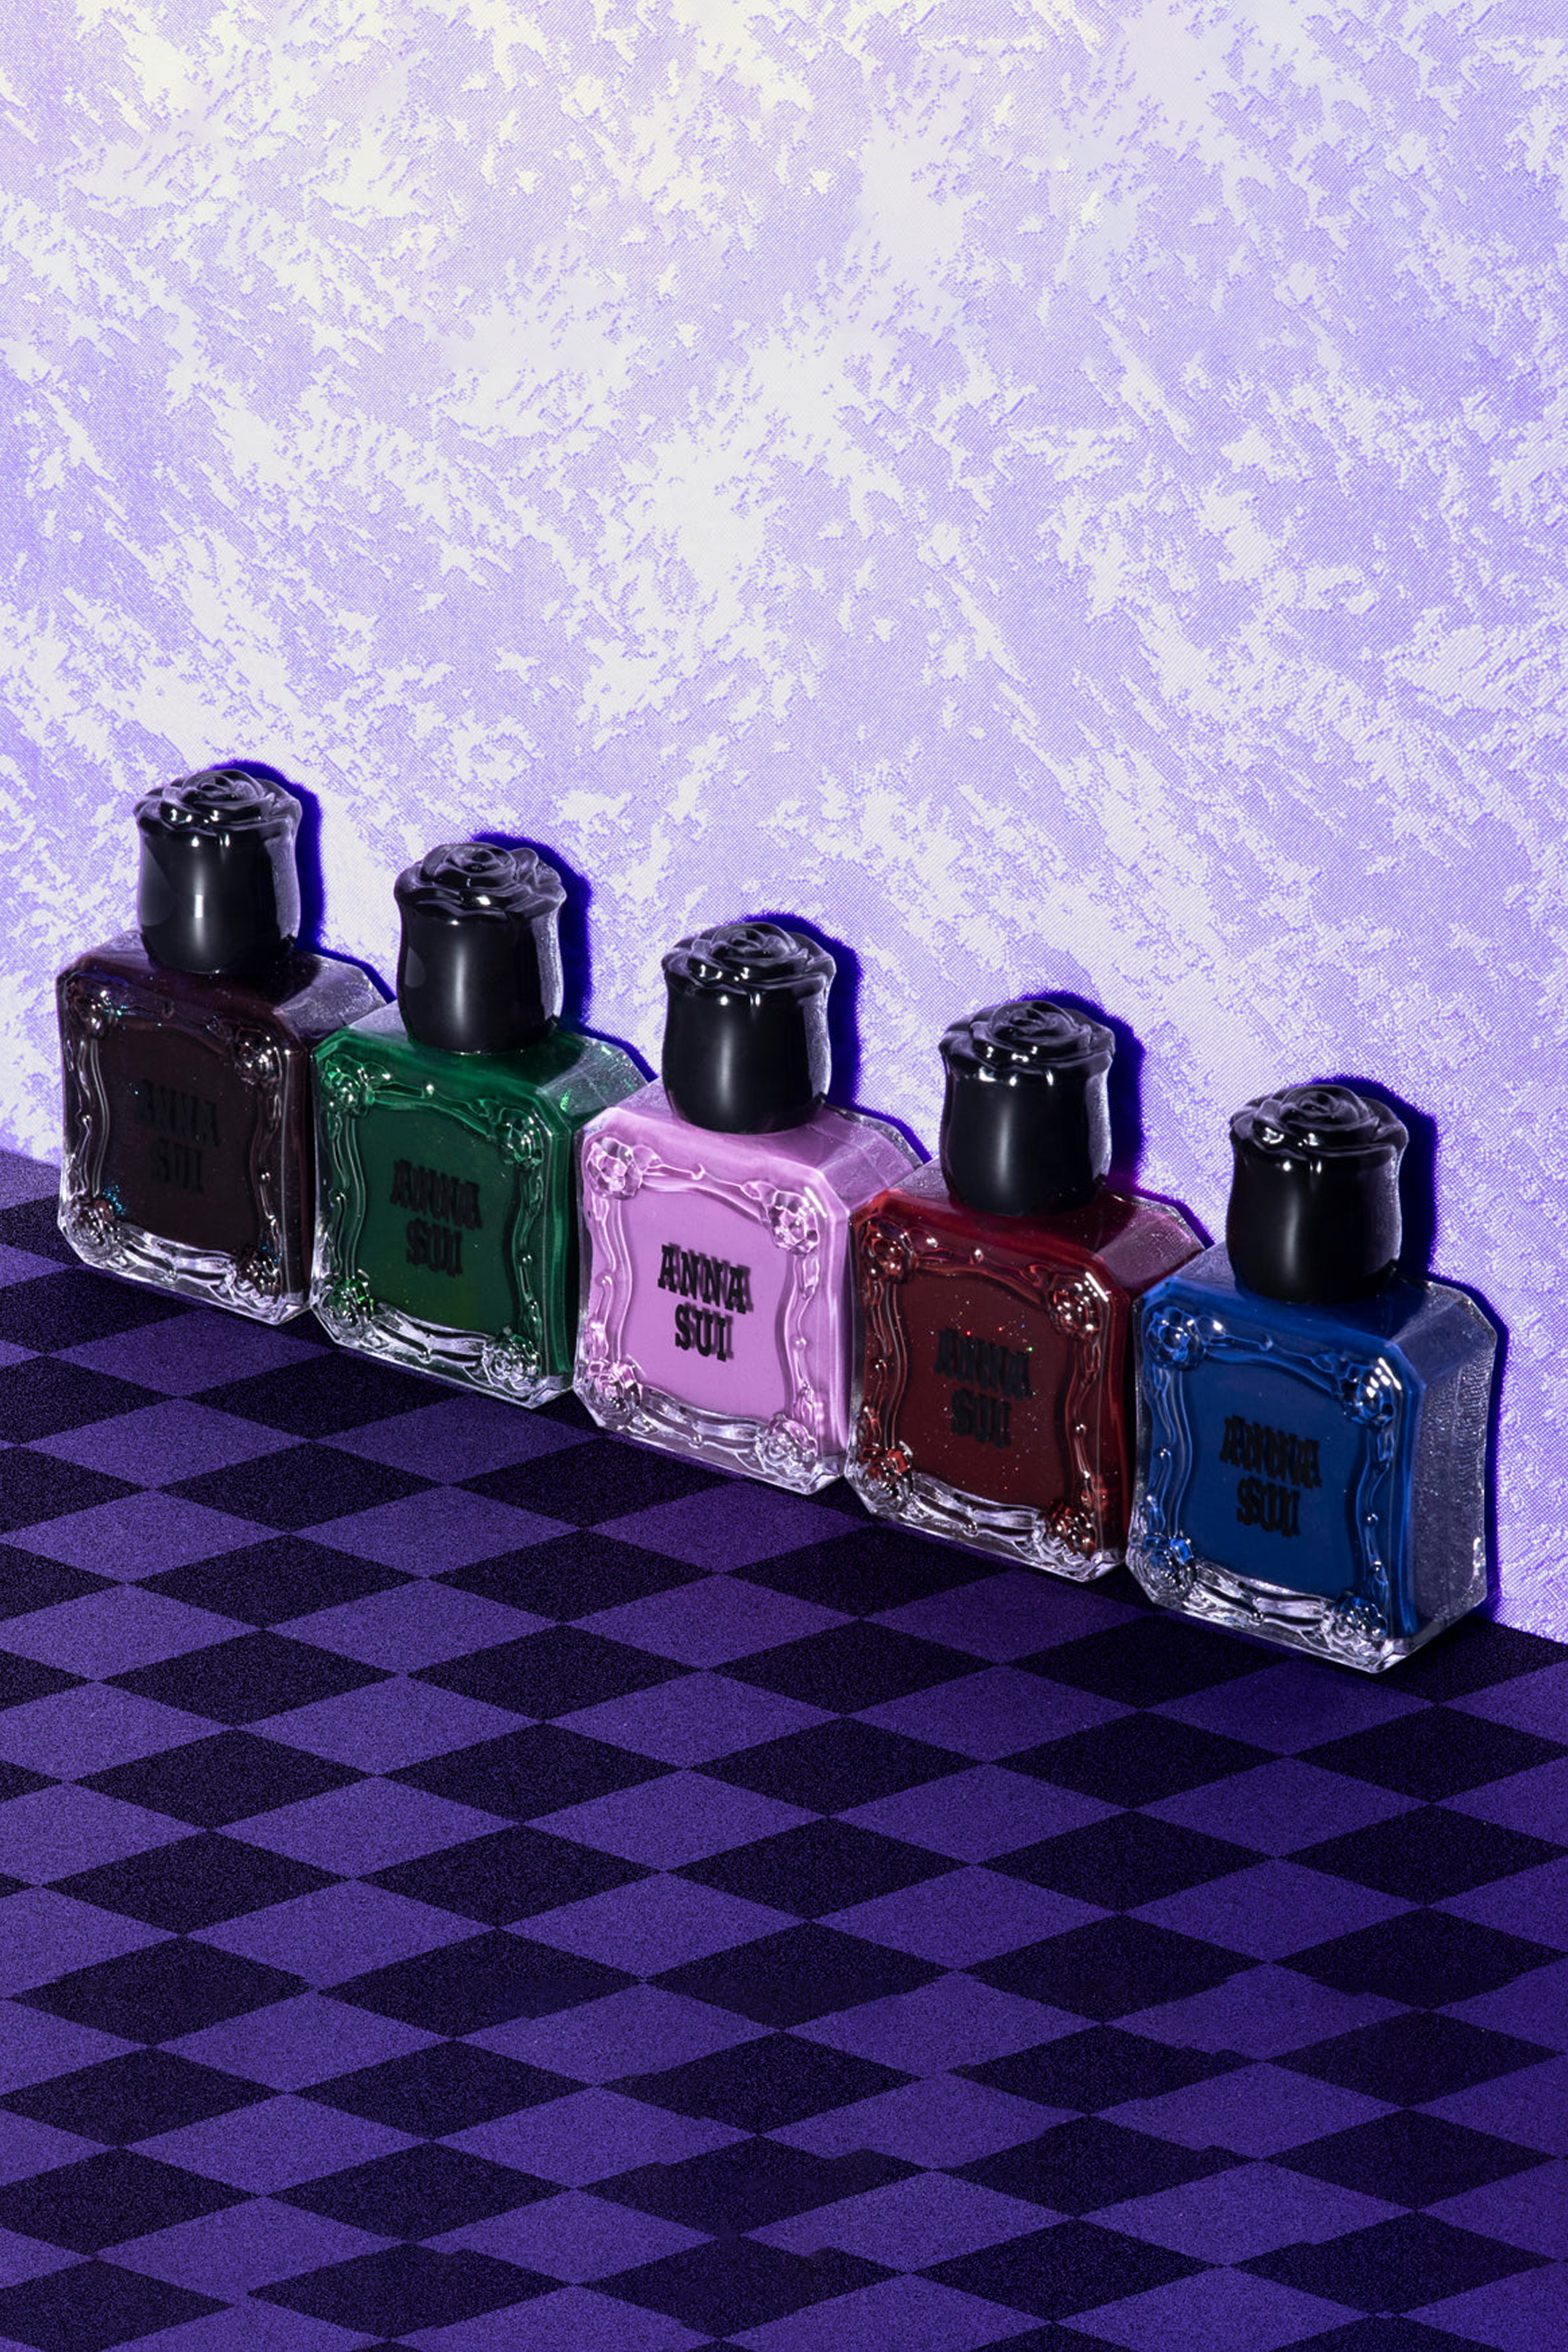 5 New colors added to our true-color nail polish collection! Fast-drying, long-lasting, and smooth